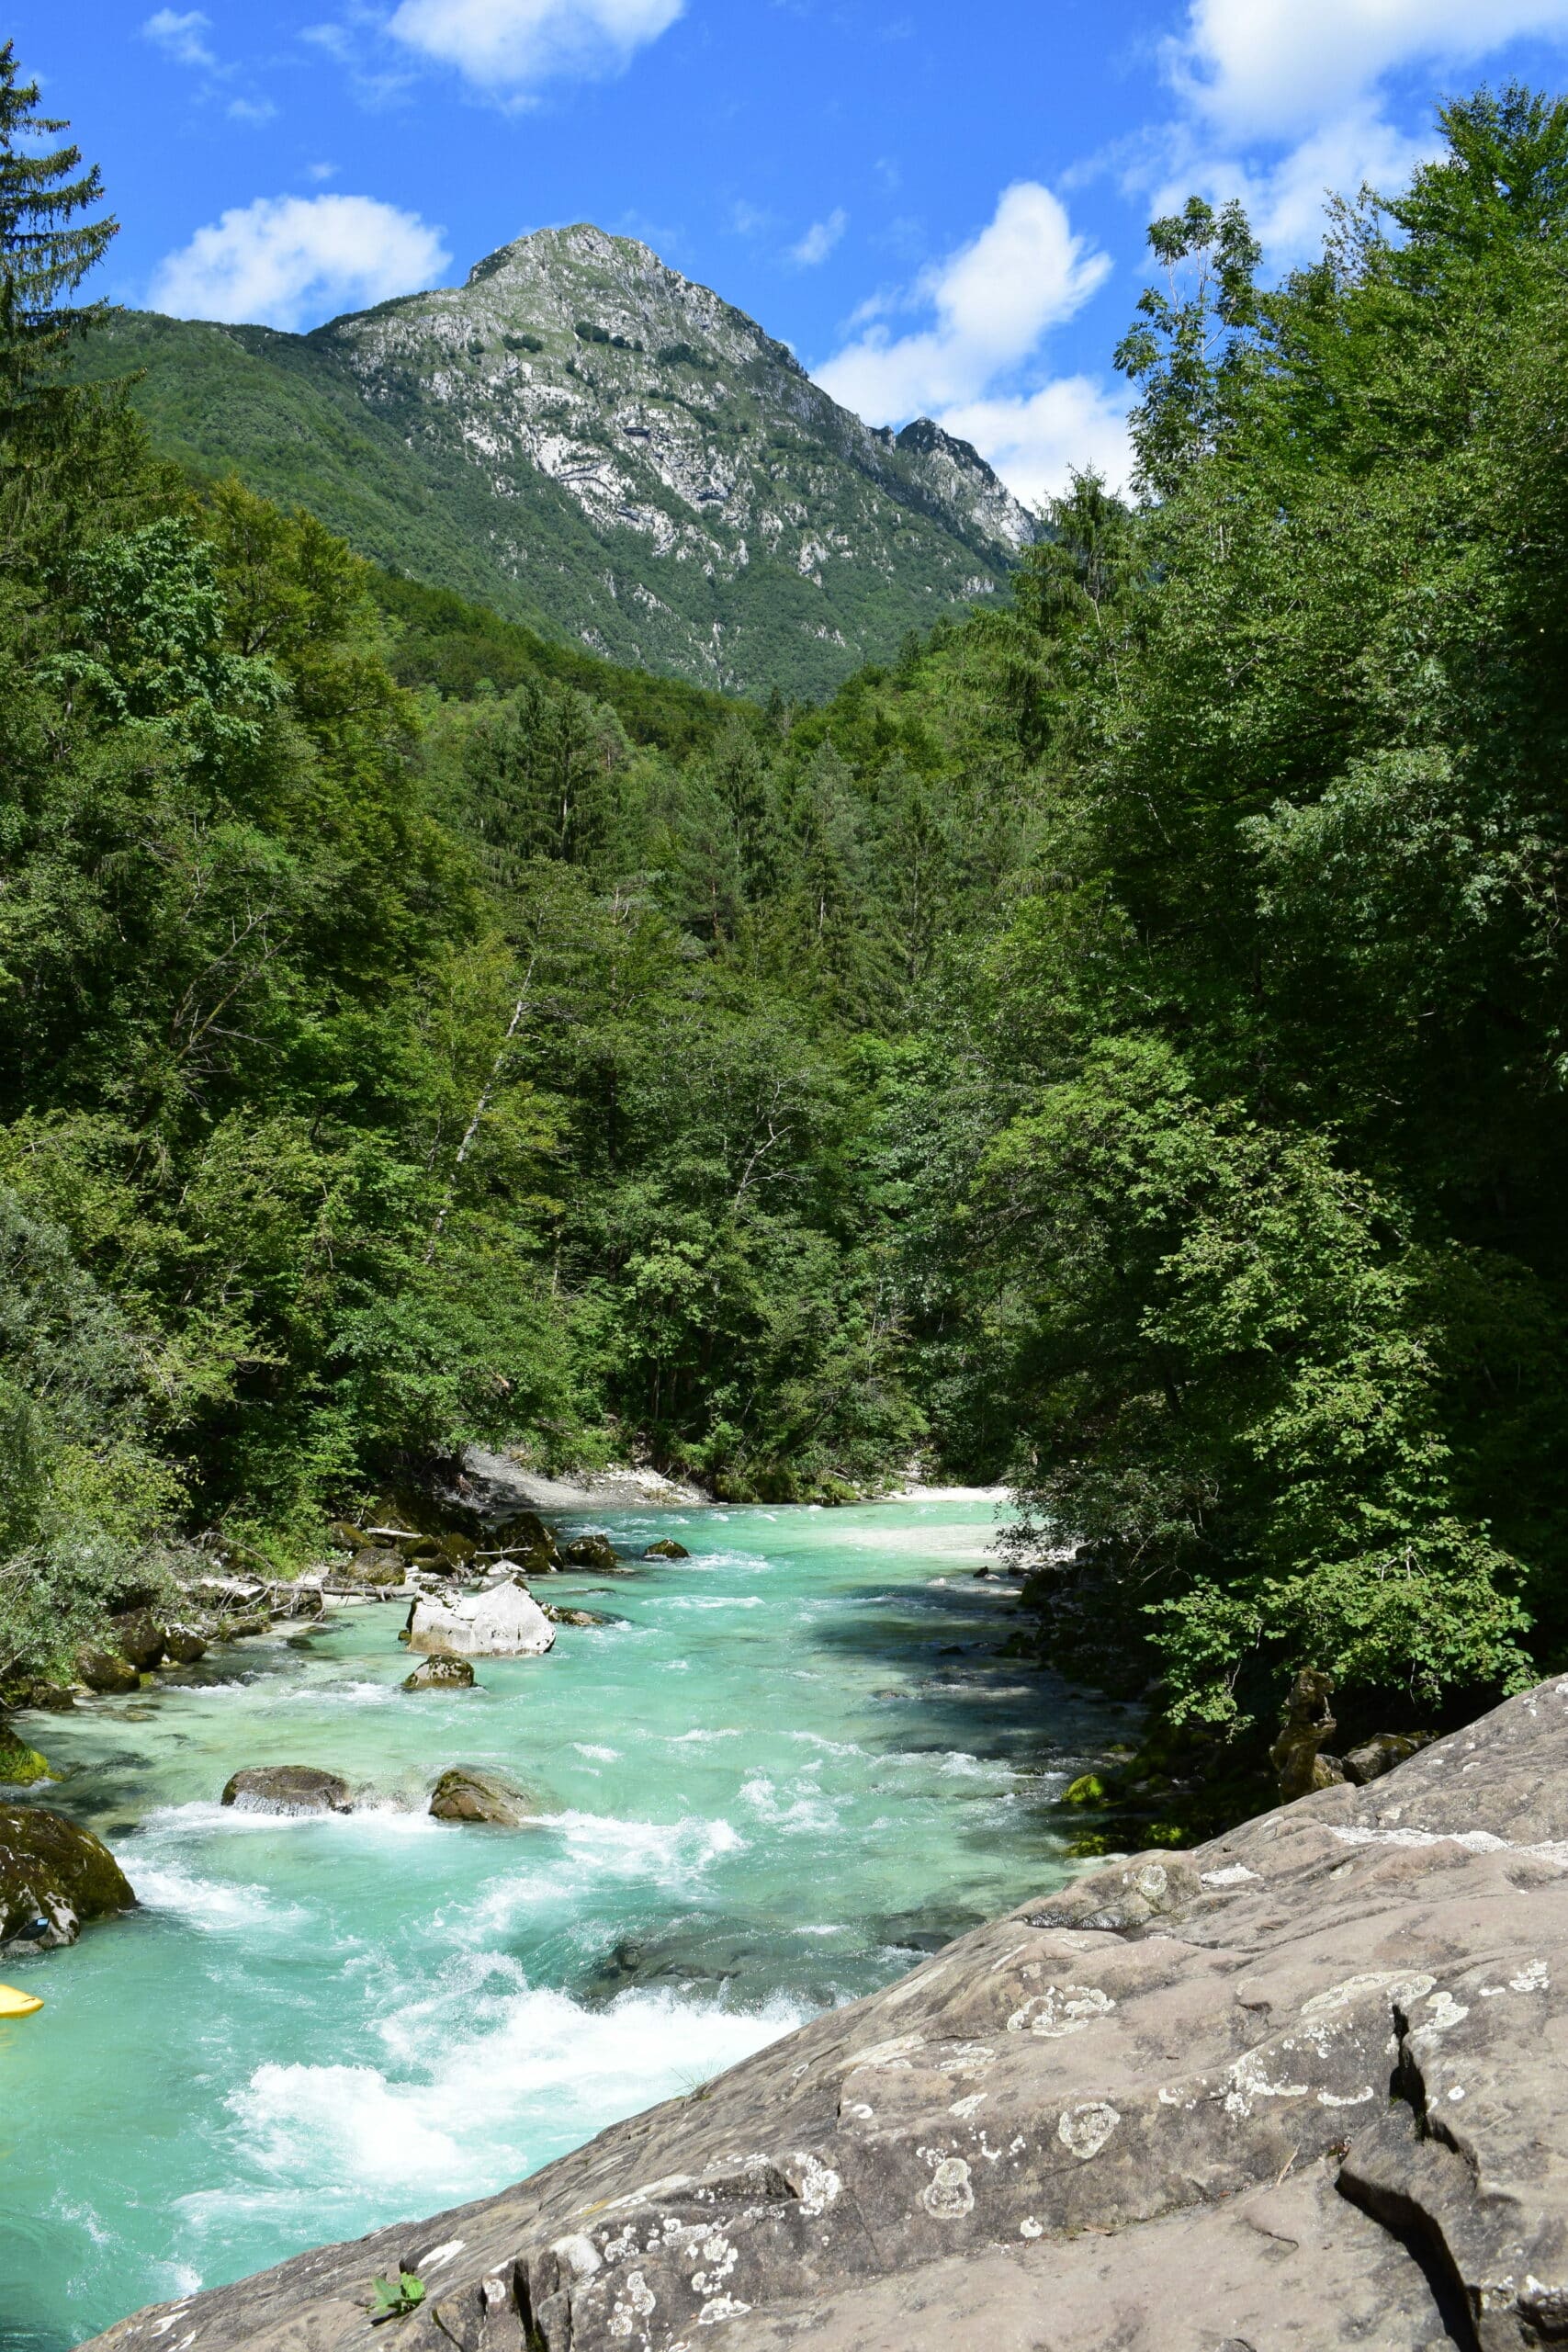 Road trip through Slovenia: our travel route and highlights